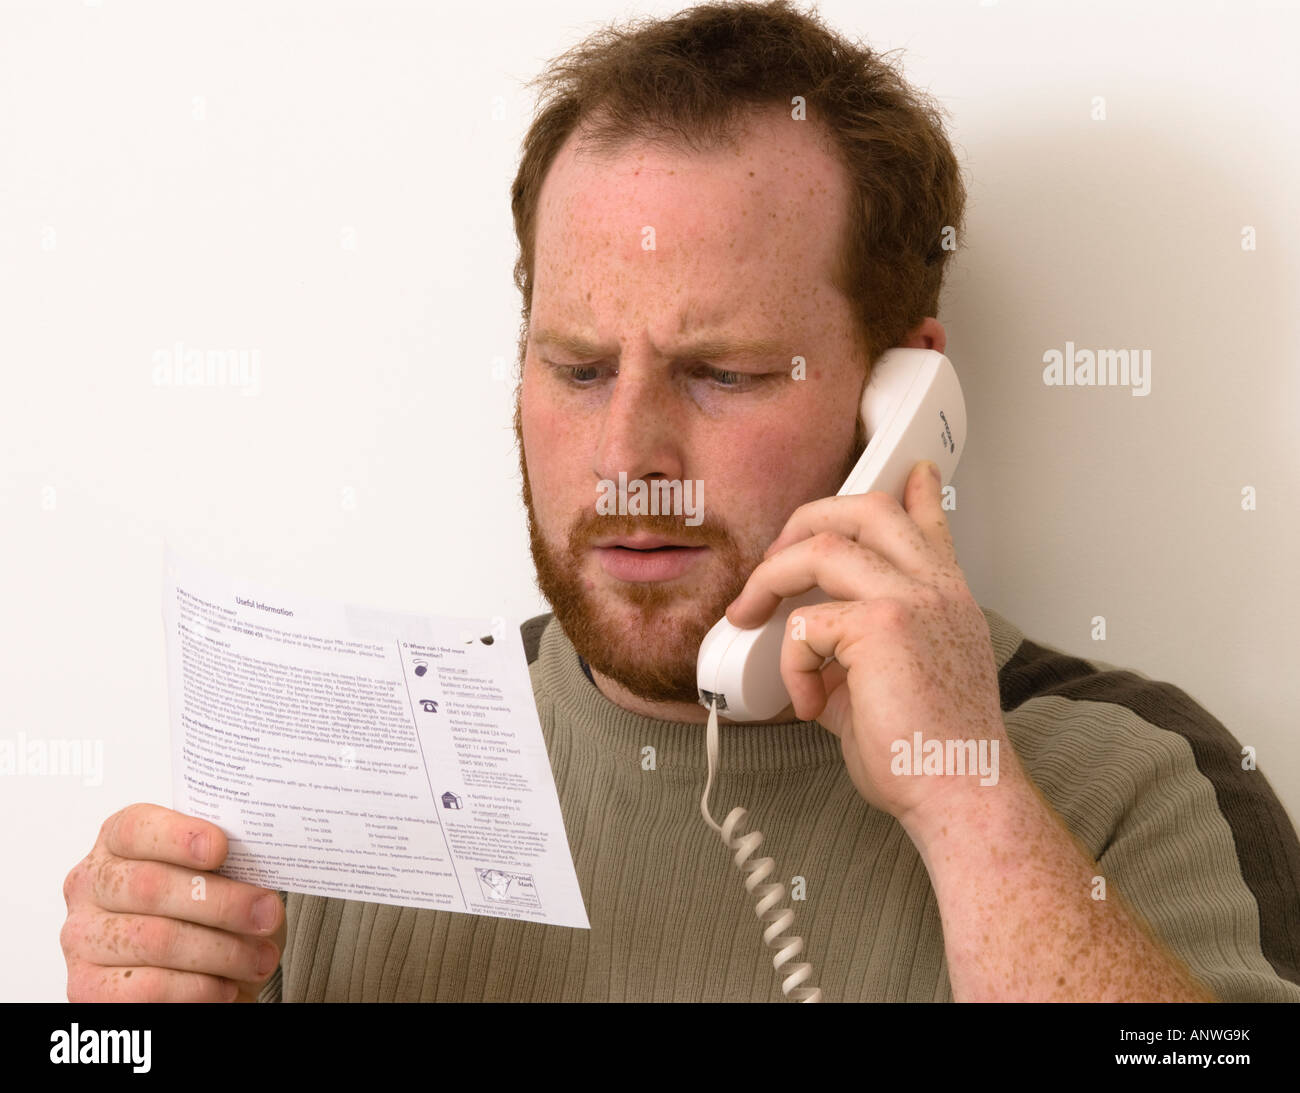 man on phone questioning items on his bank statements showing startled surprise or horror Stock Photo